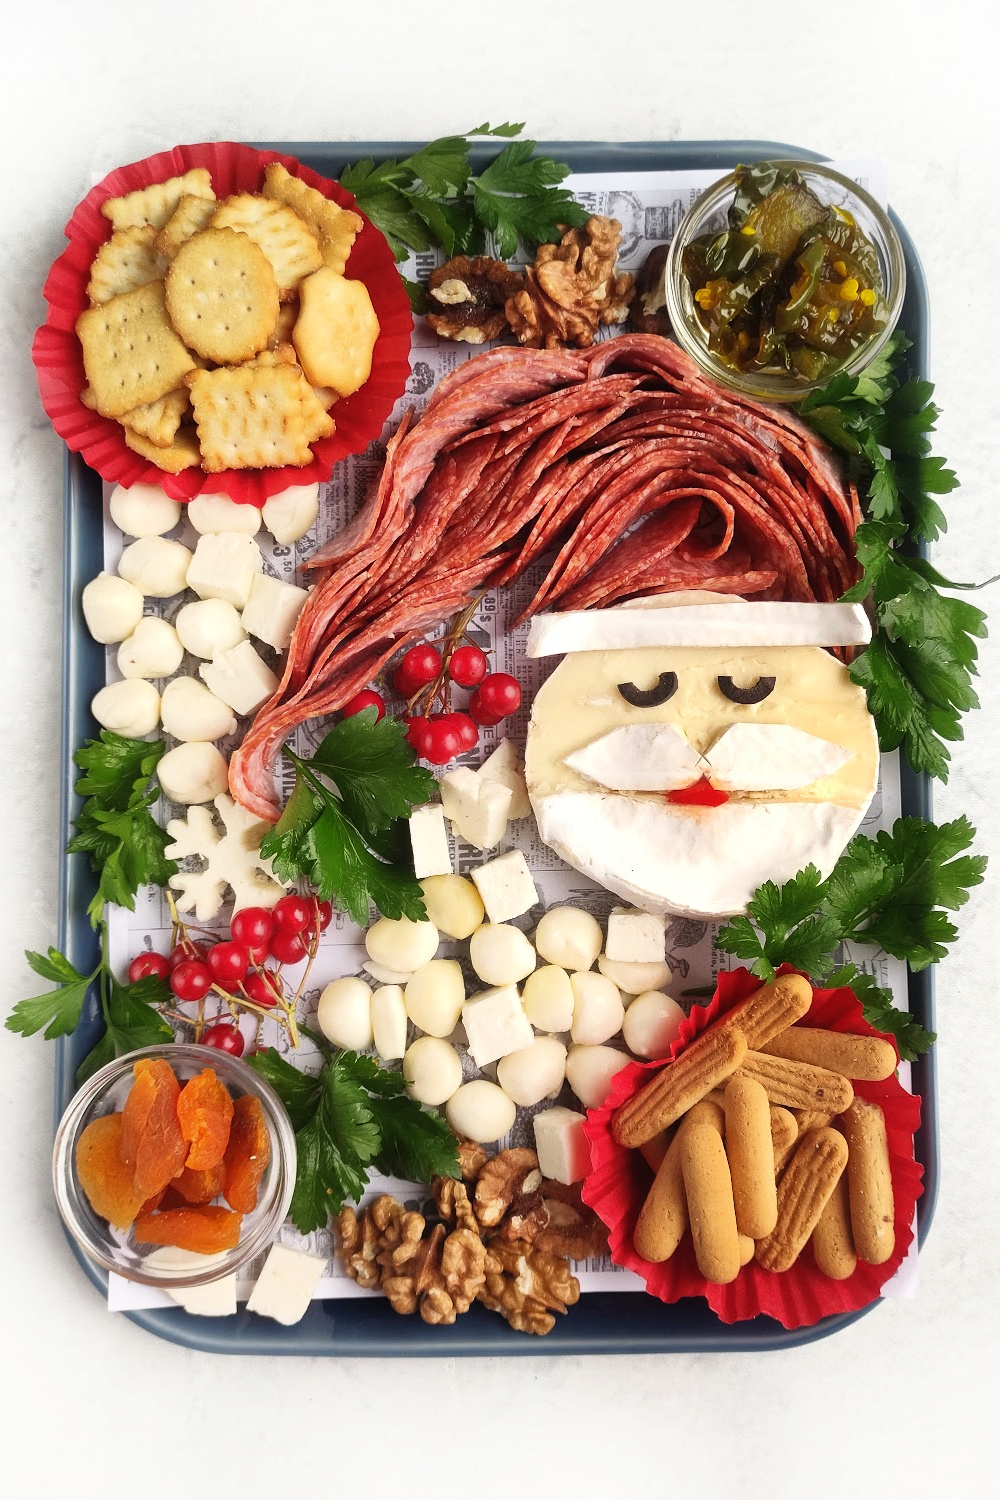 Santa Charcuterie Board. Santa is made out of brie cheese with a salami Santa hat. The Santa cheese is surrounded by other cheeses, crackers, dried fruit and nuts.